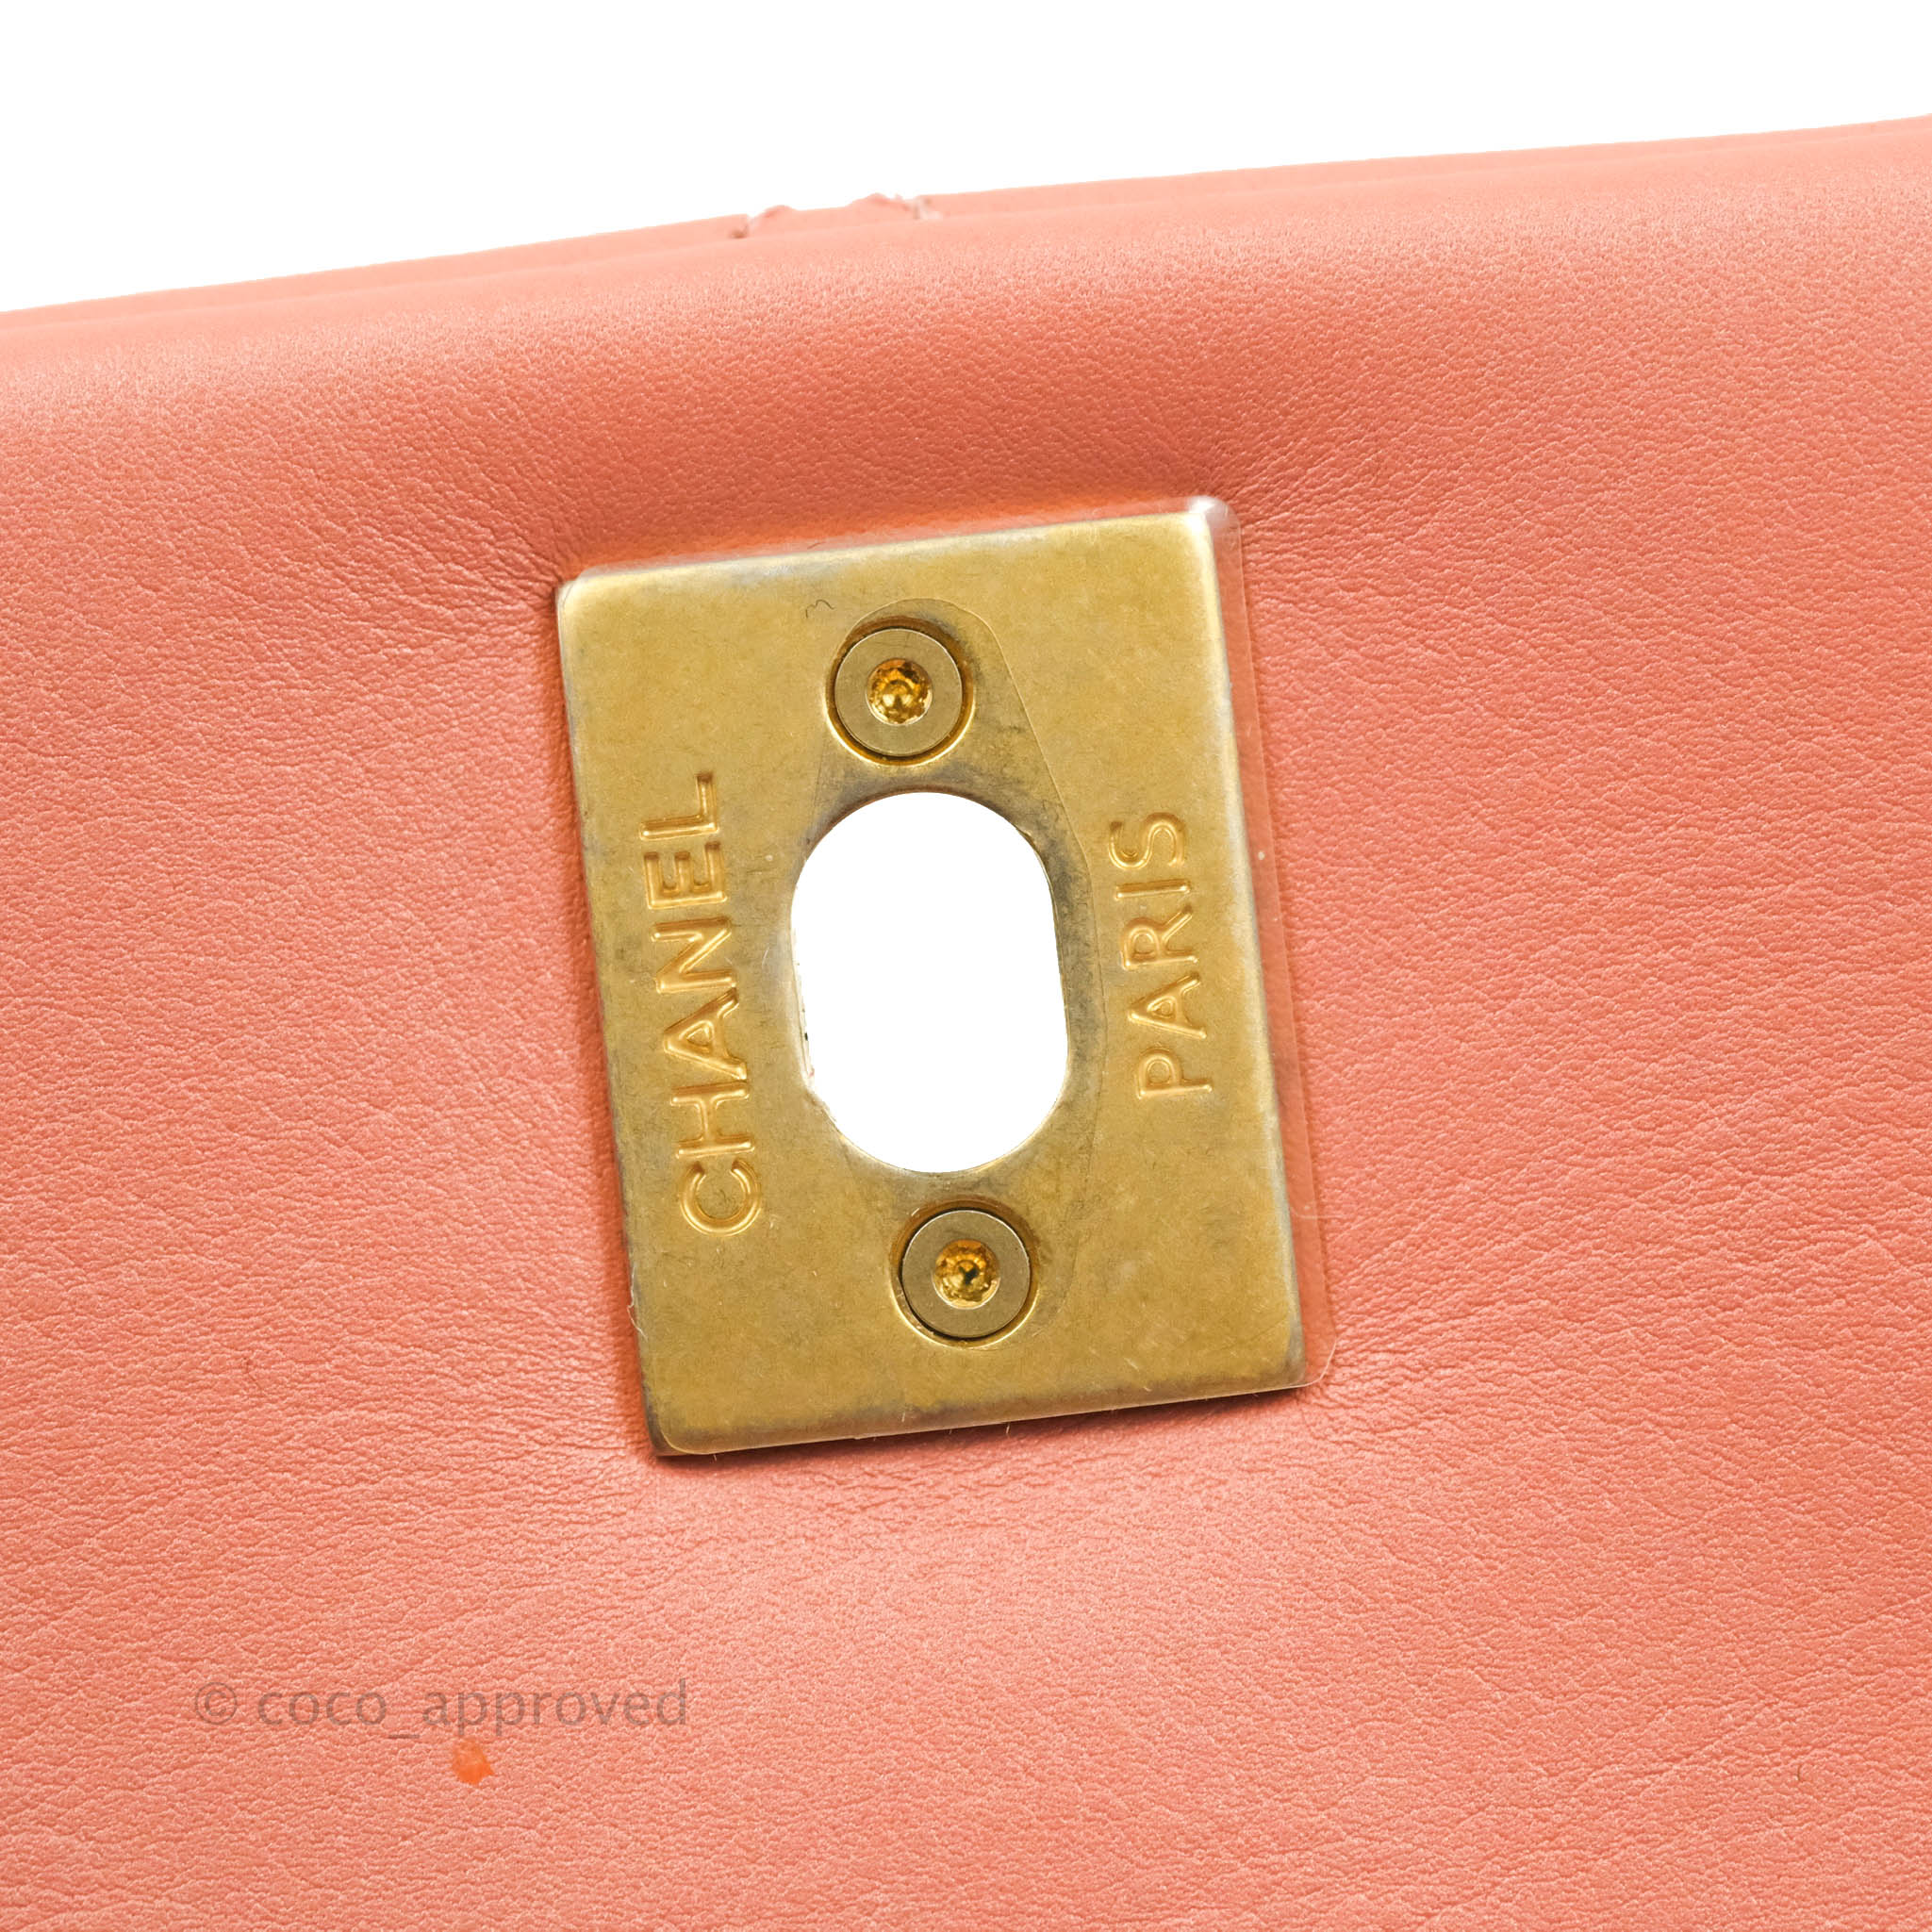 Chanel Mini Flap Bag With Top Handle Pink Lambskin Gold Hardware